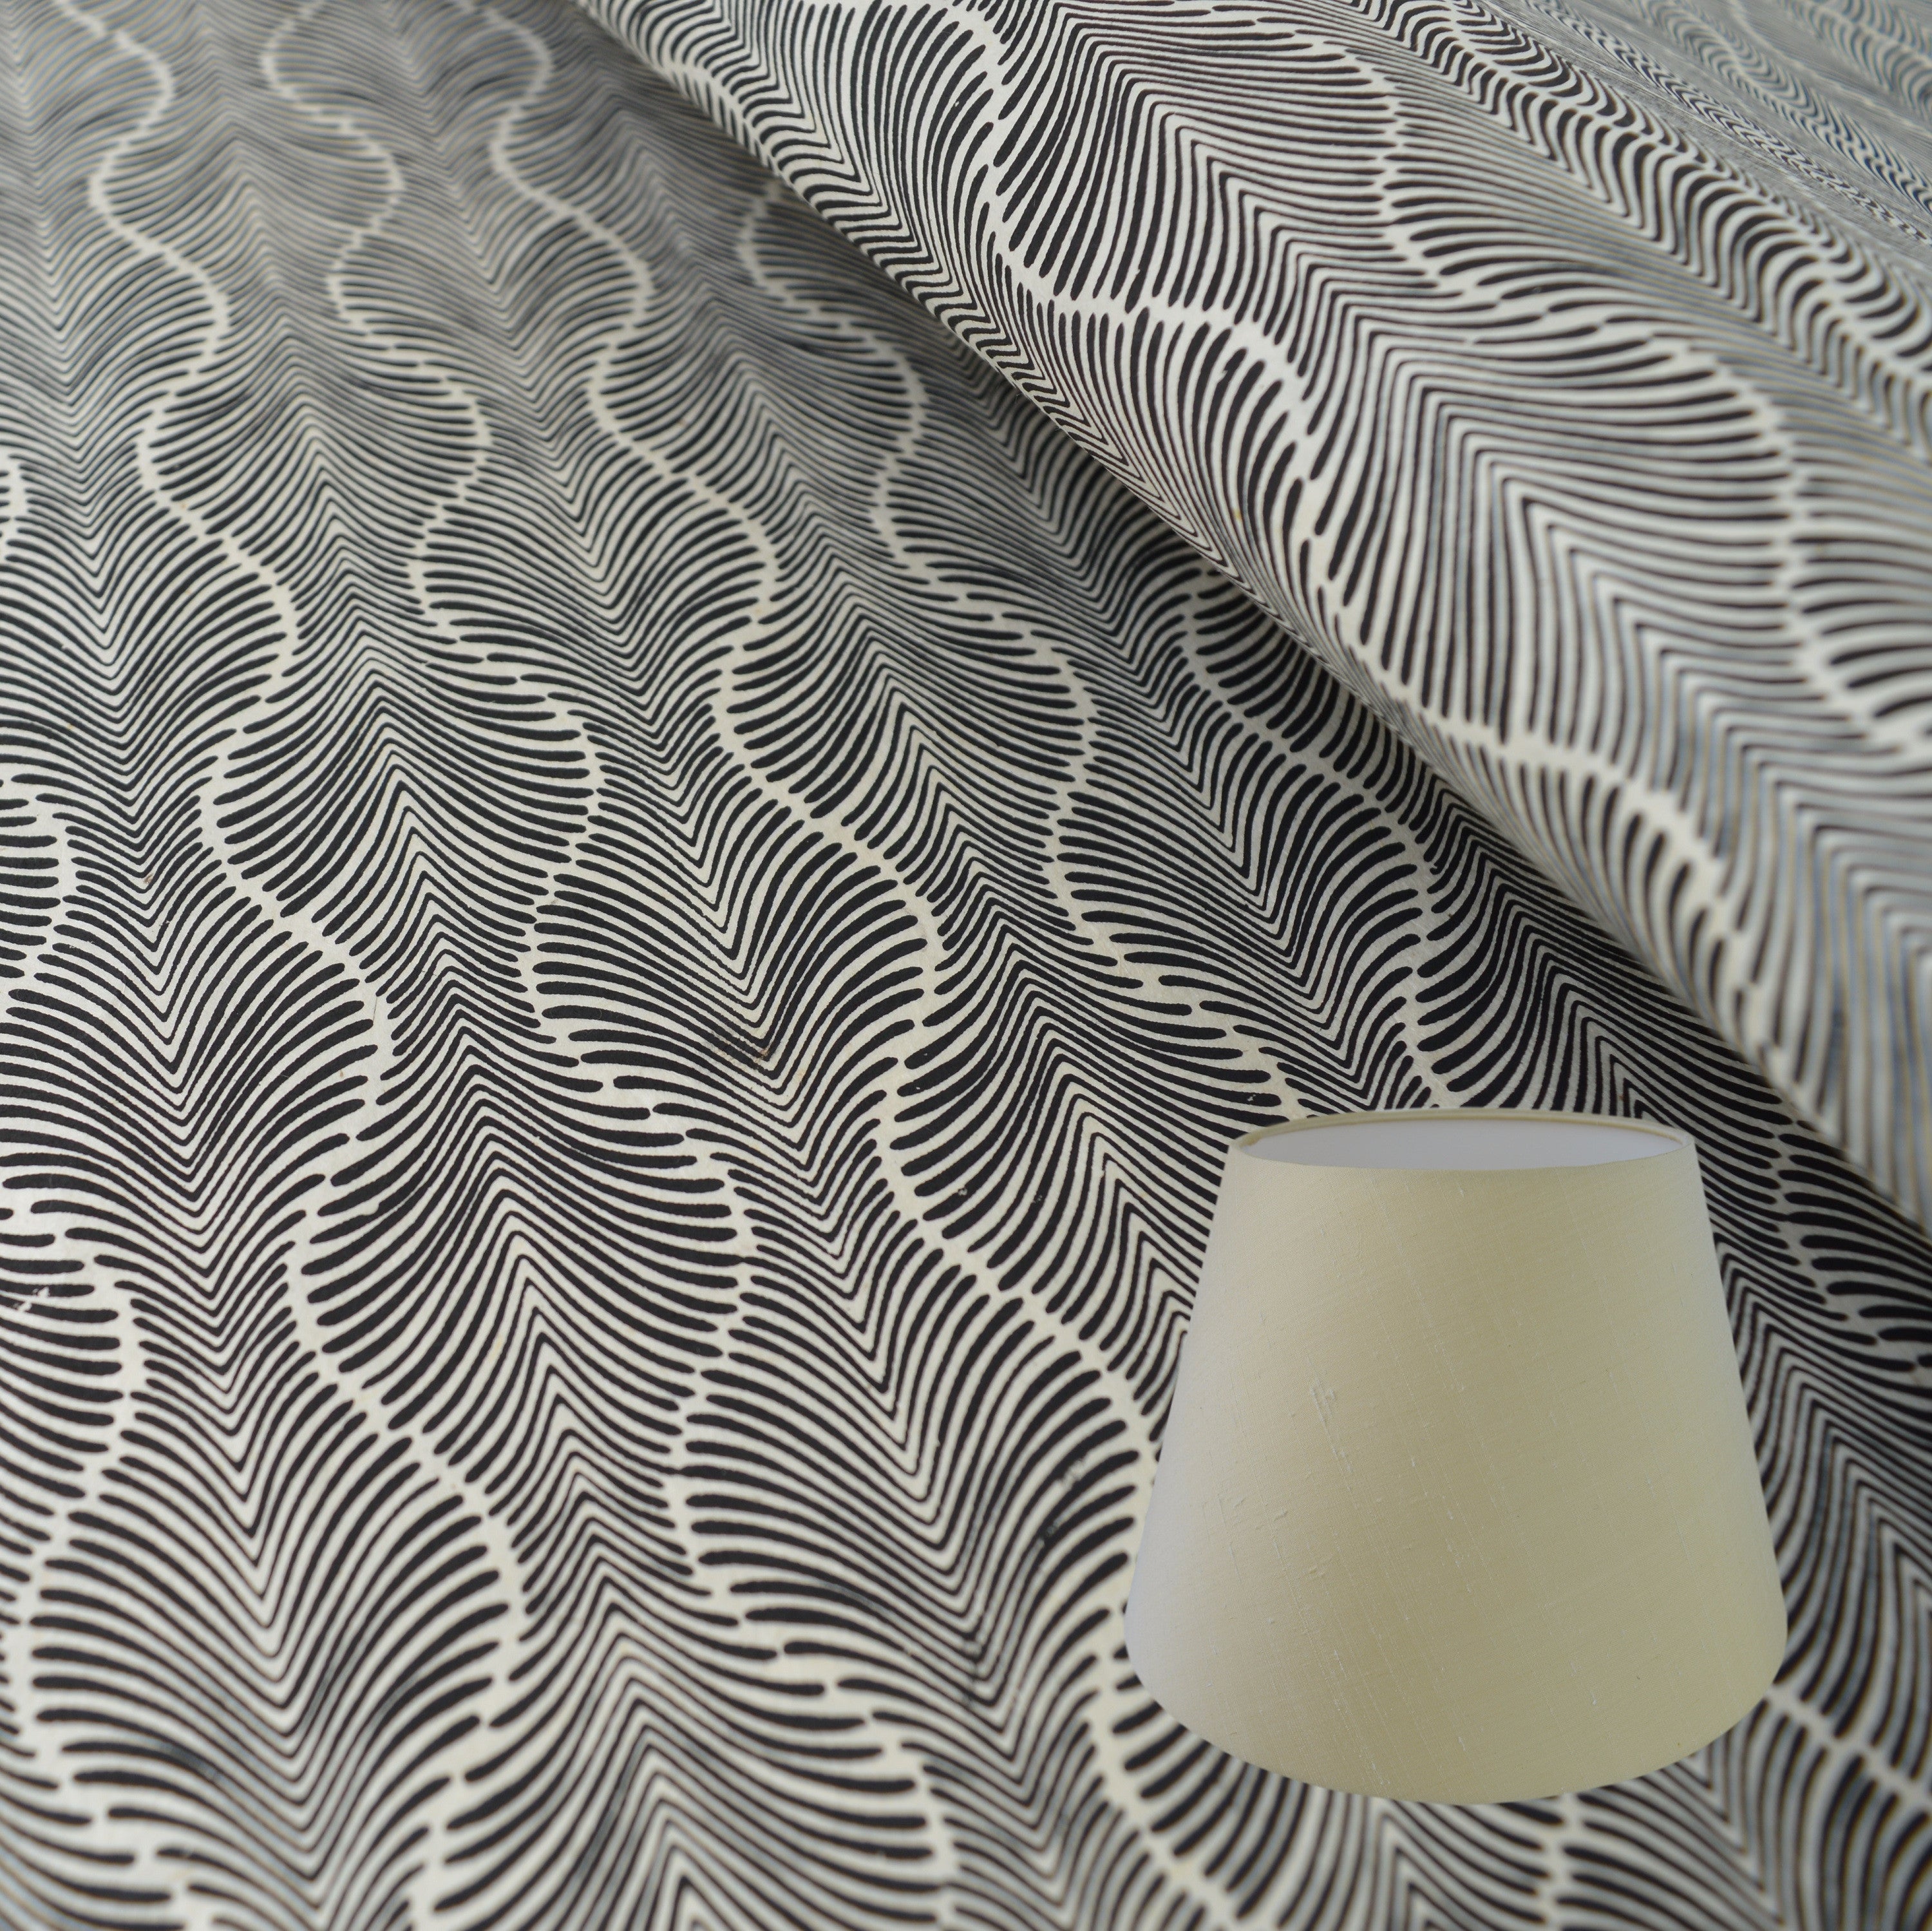 Munro and Kerr black and white monochrome hand printed paper for an empire lampshade